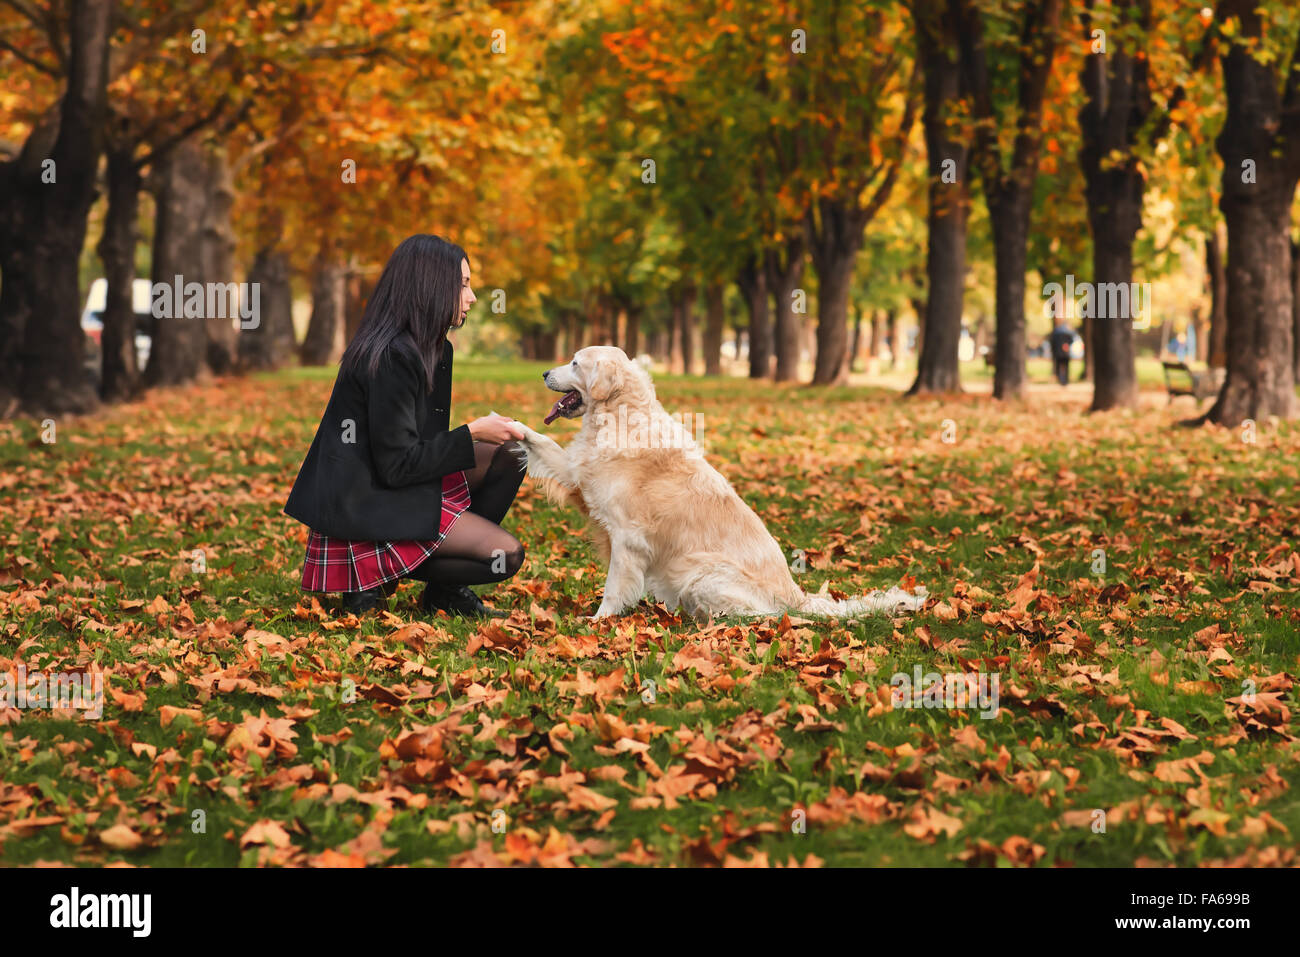 Girl sitting in park with her dog Stock Photo